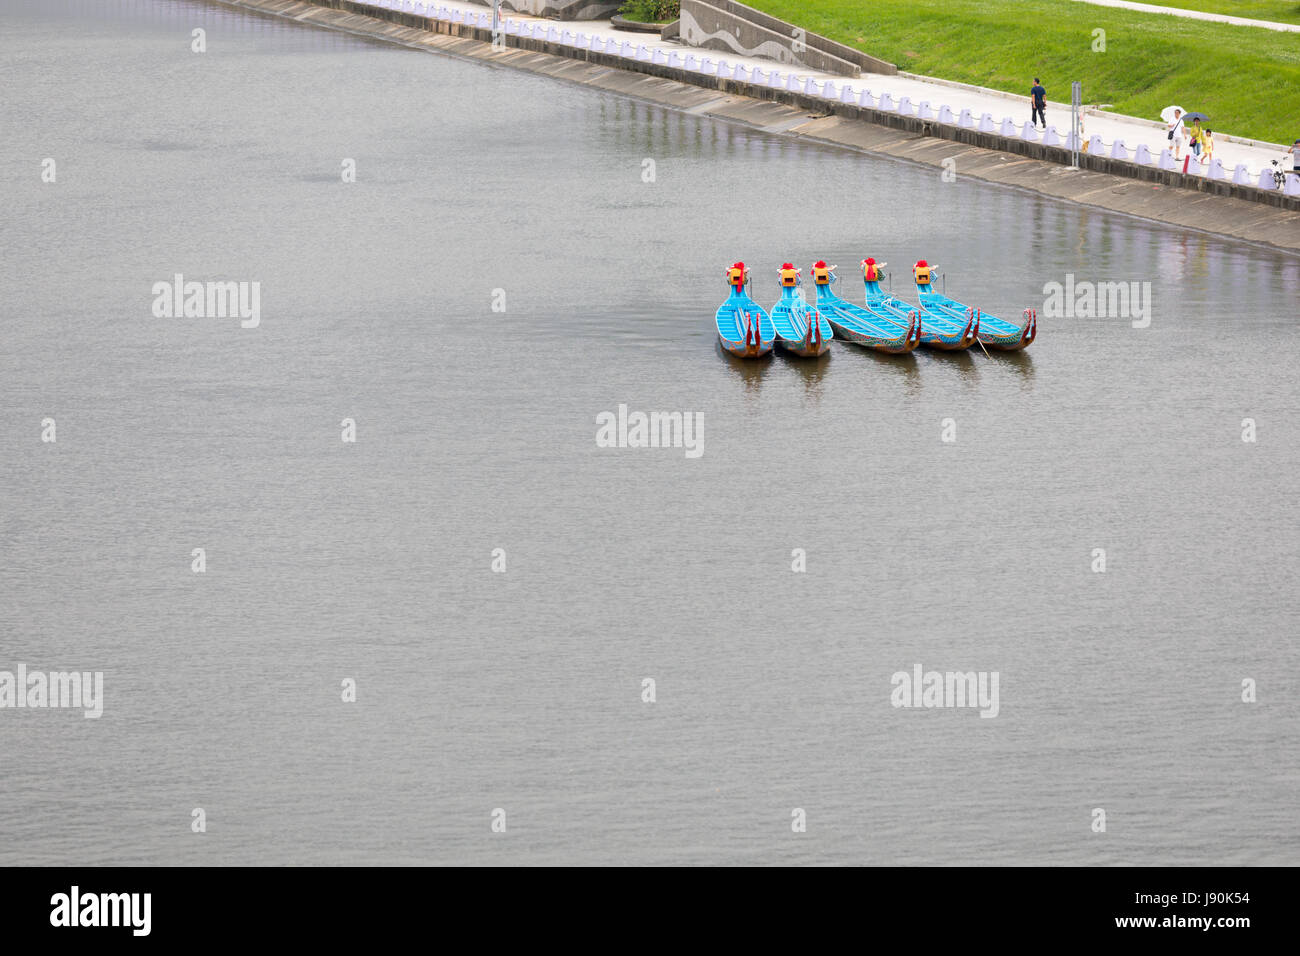 Taipei, Taiwan. 30th May, 2017. Visitors to this year's dragon boat races that take place on Keelung River in Taipei every year on Duanwu Festival, better known as Dragon Boat Festival, walk along Keelung River past five dragon boats anchored on the river on May 30. Credit: Perry Svensson/Alamy Live News Stock Photo